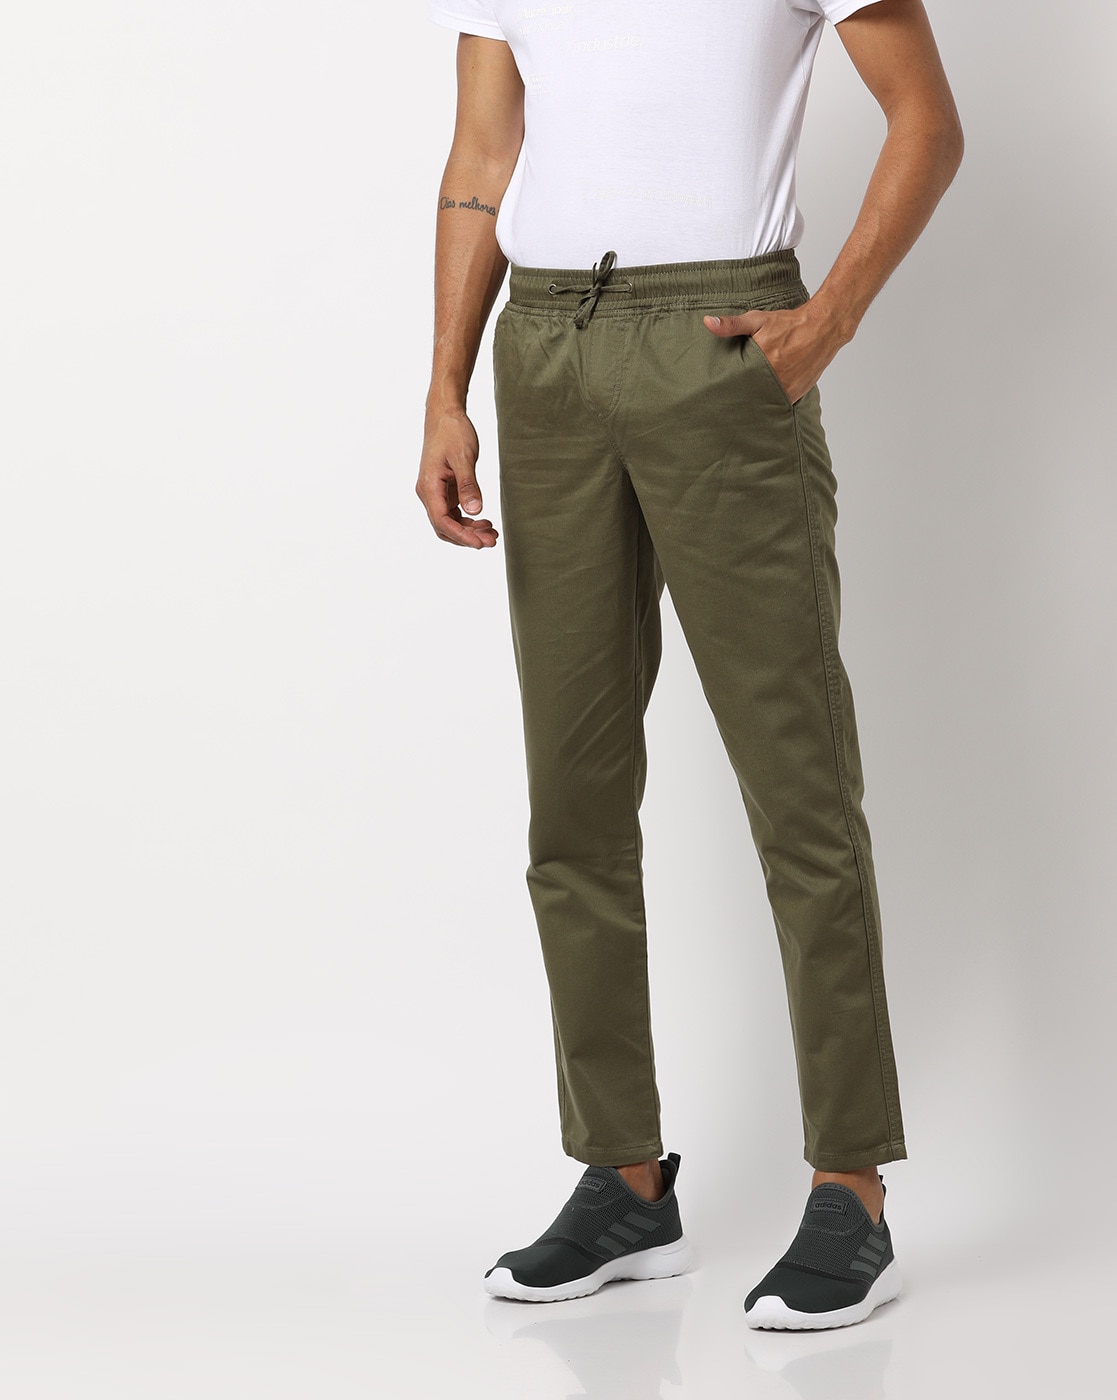 Buy Green Trousers & Pants for Men by T-Base Online | Ajio.com